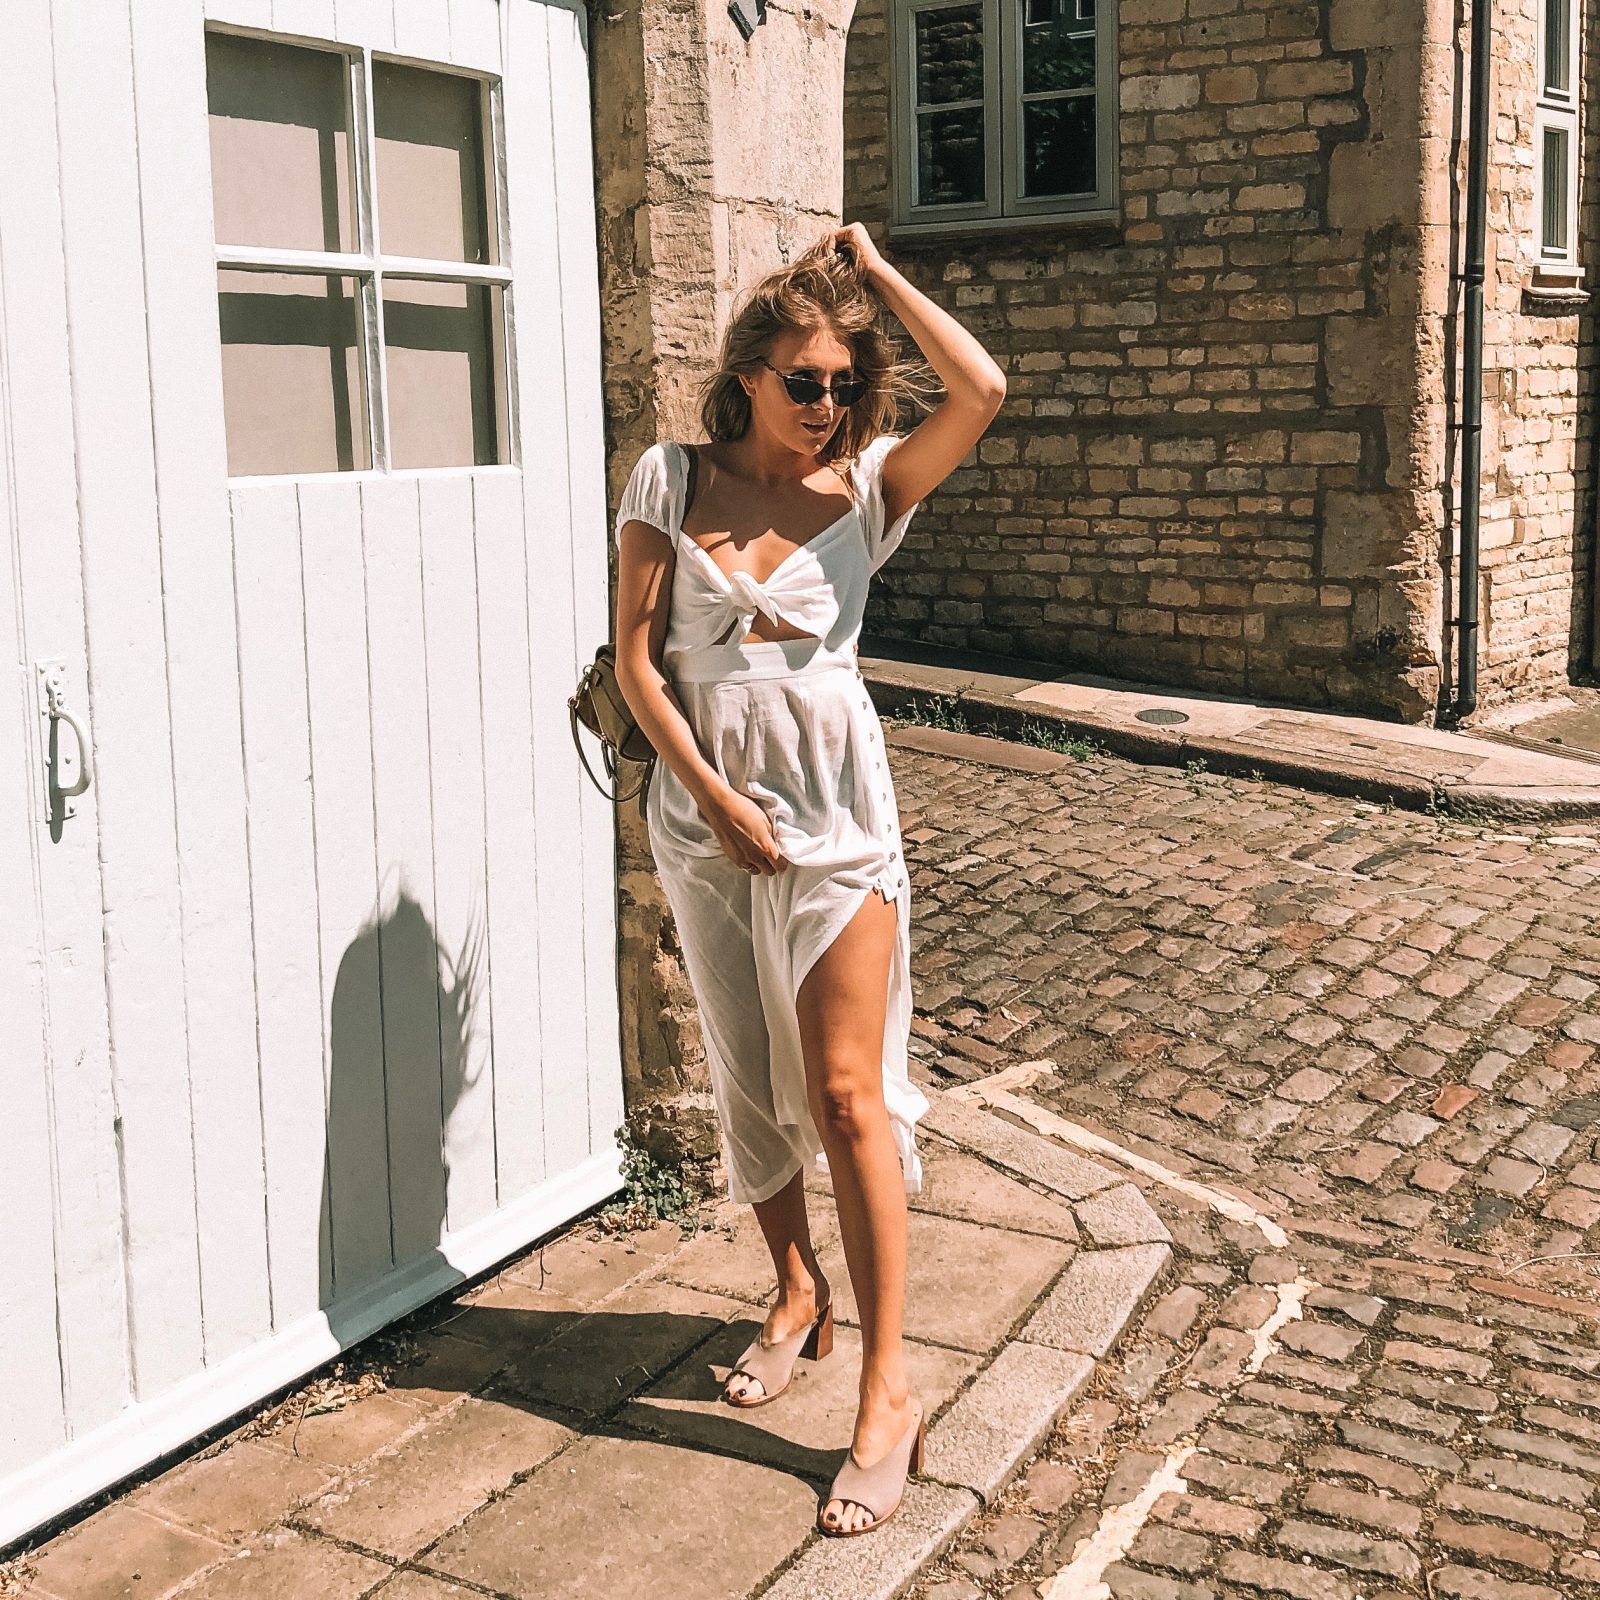 Free People Summer Dress - Free People White Tie Front Dress - Fashion Blogger Sinead Crowe